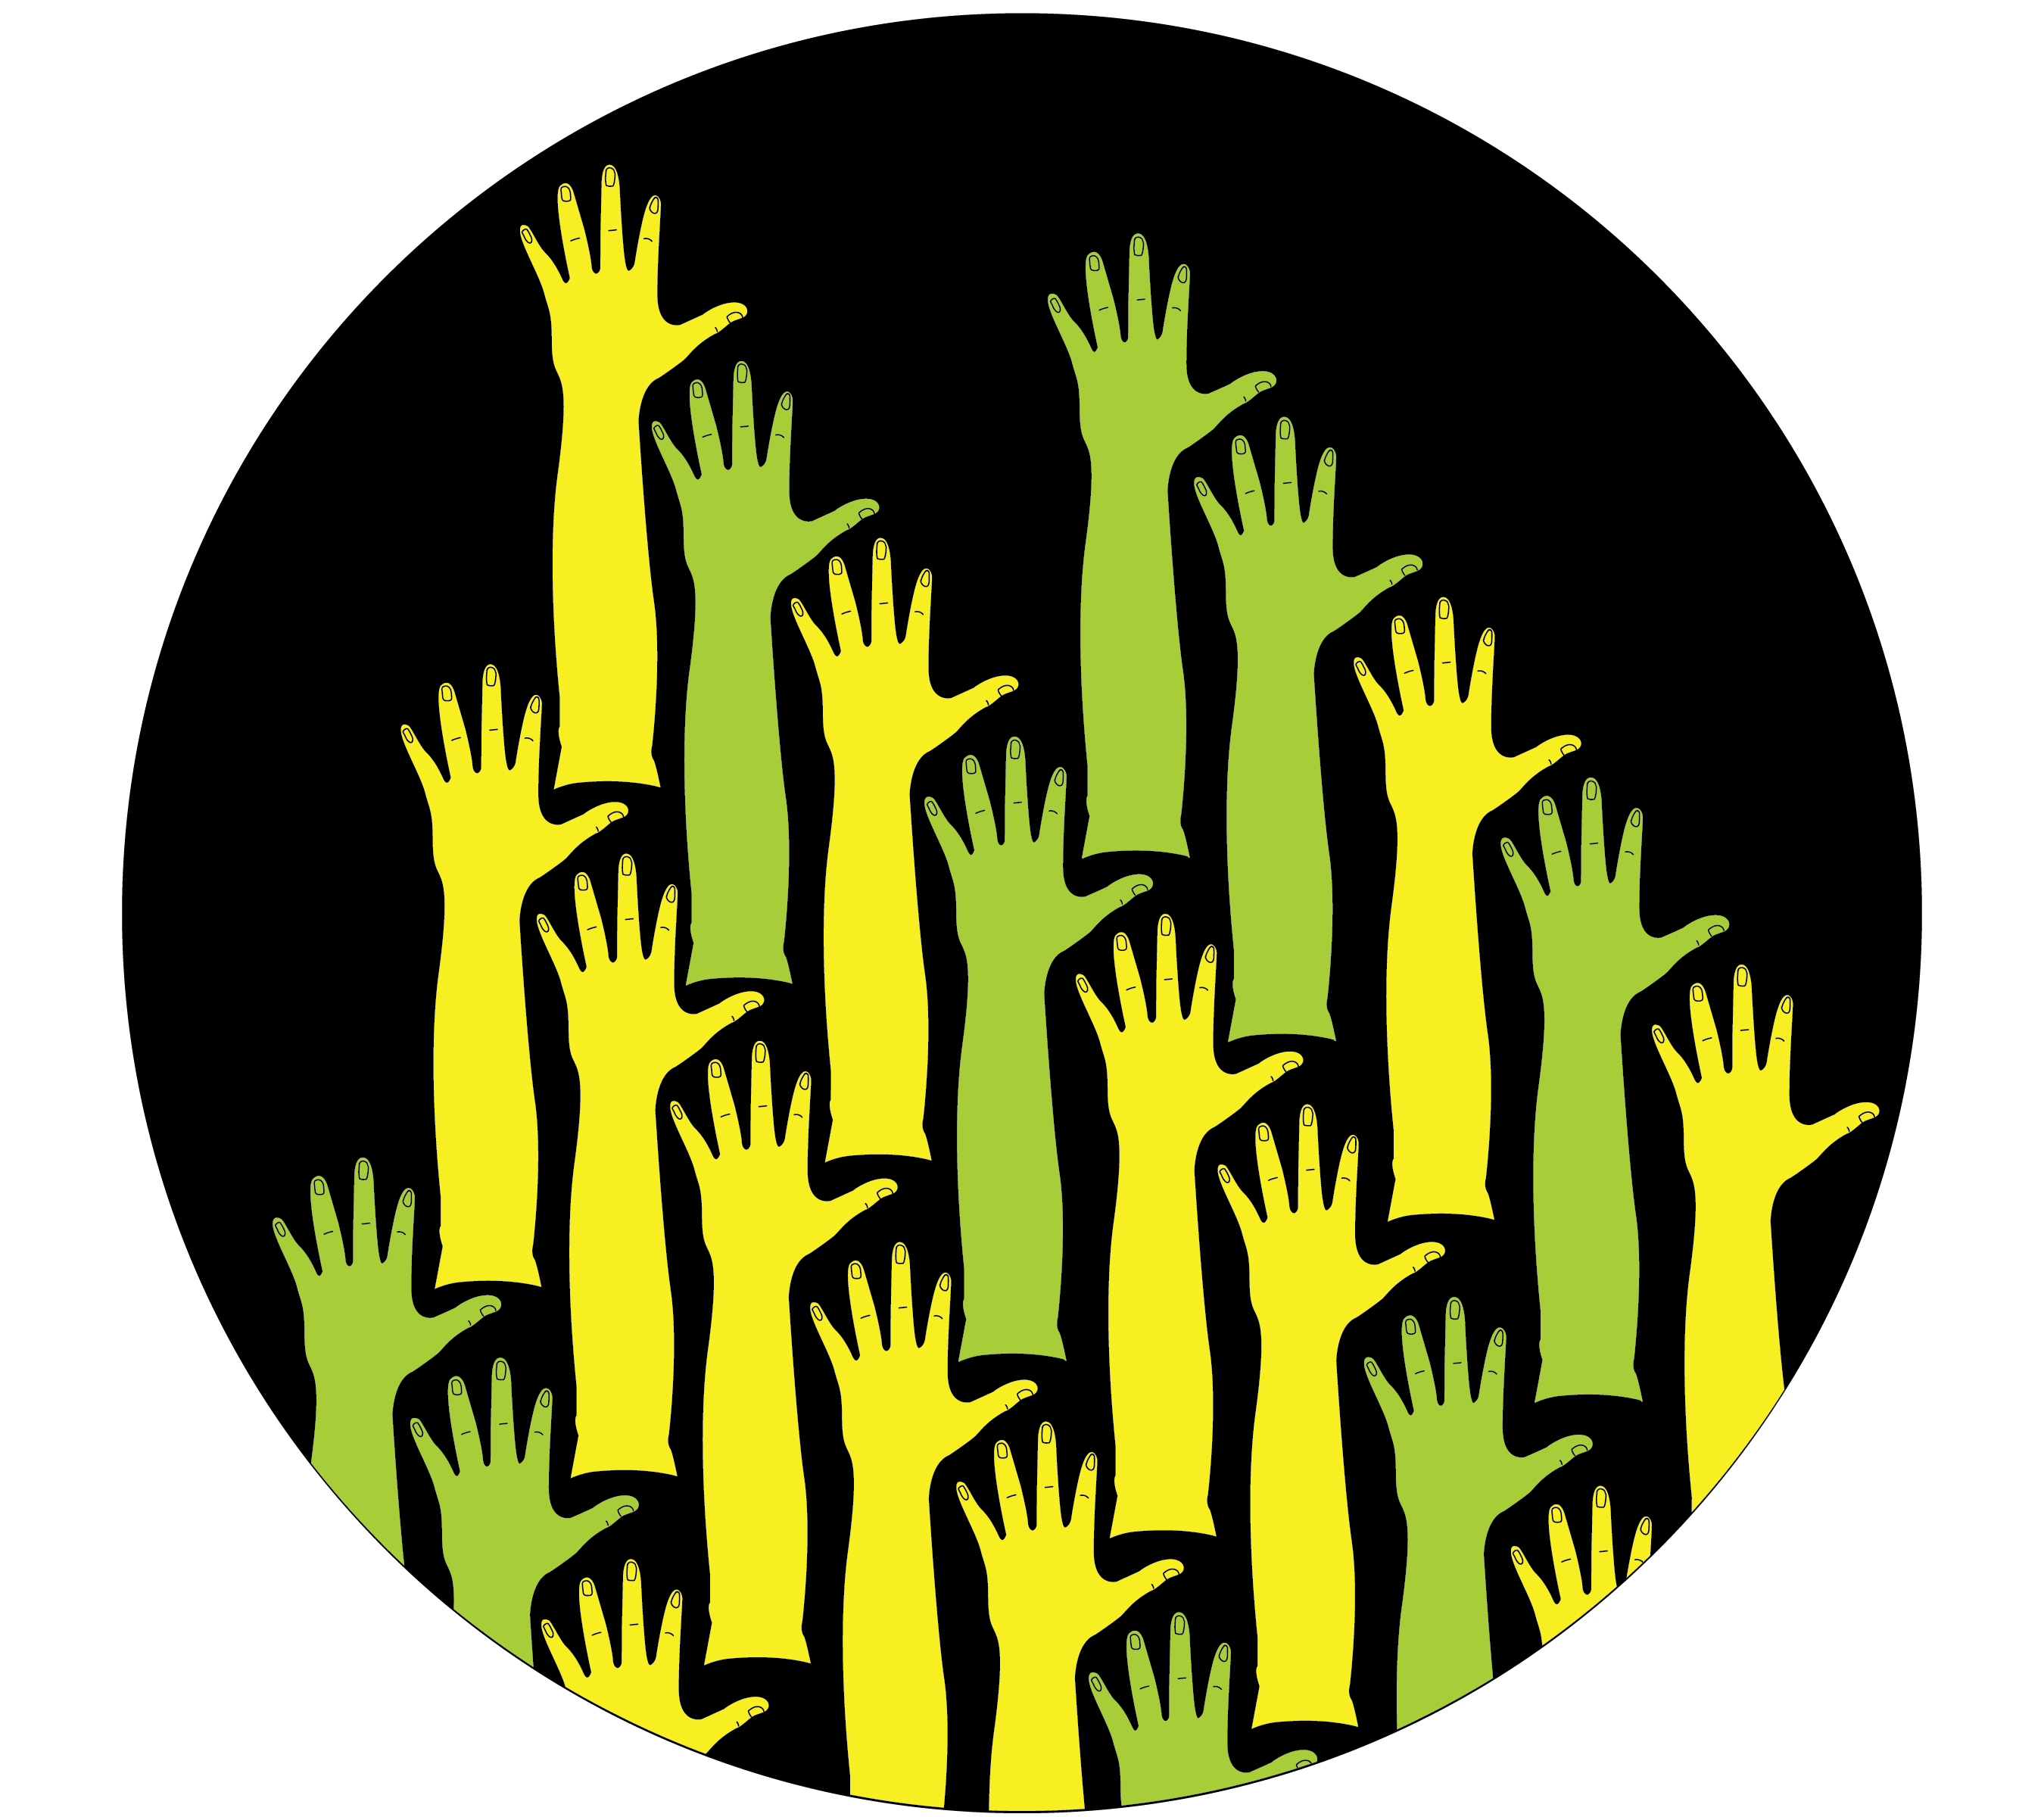 Image of many green and yellow raised hands by Aram Han Sifuentes